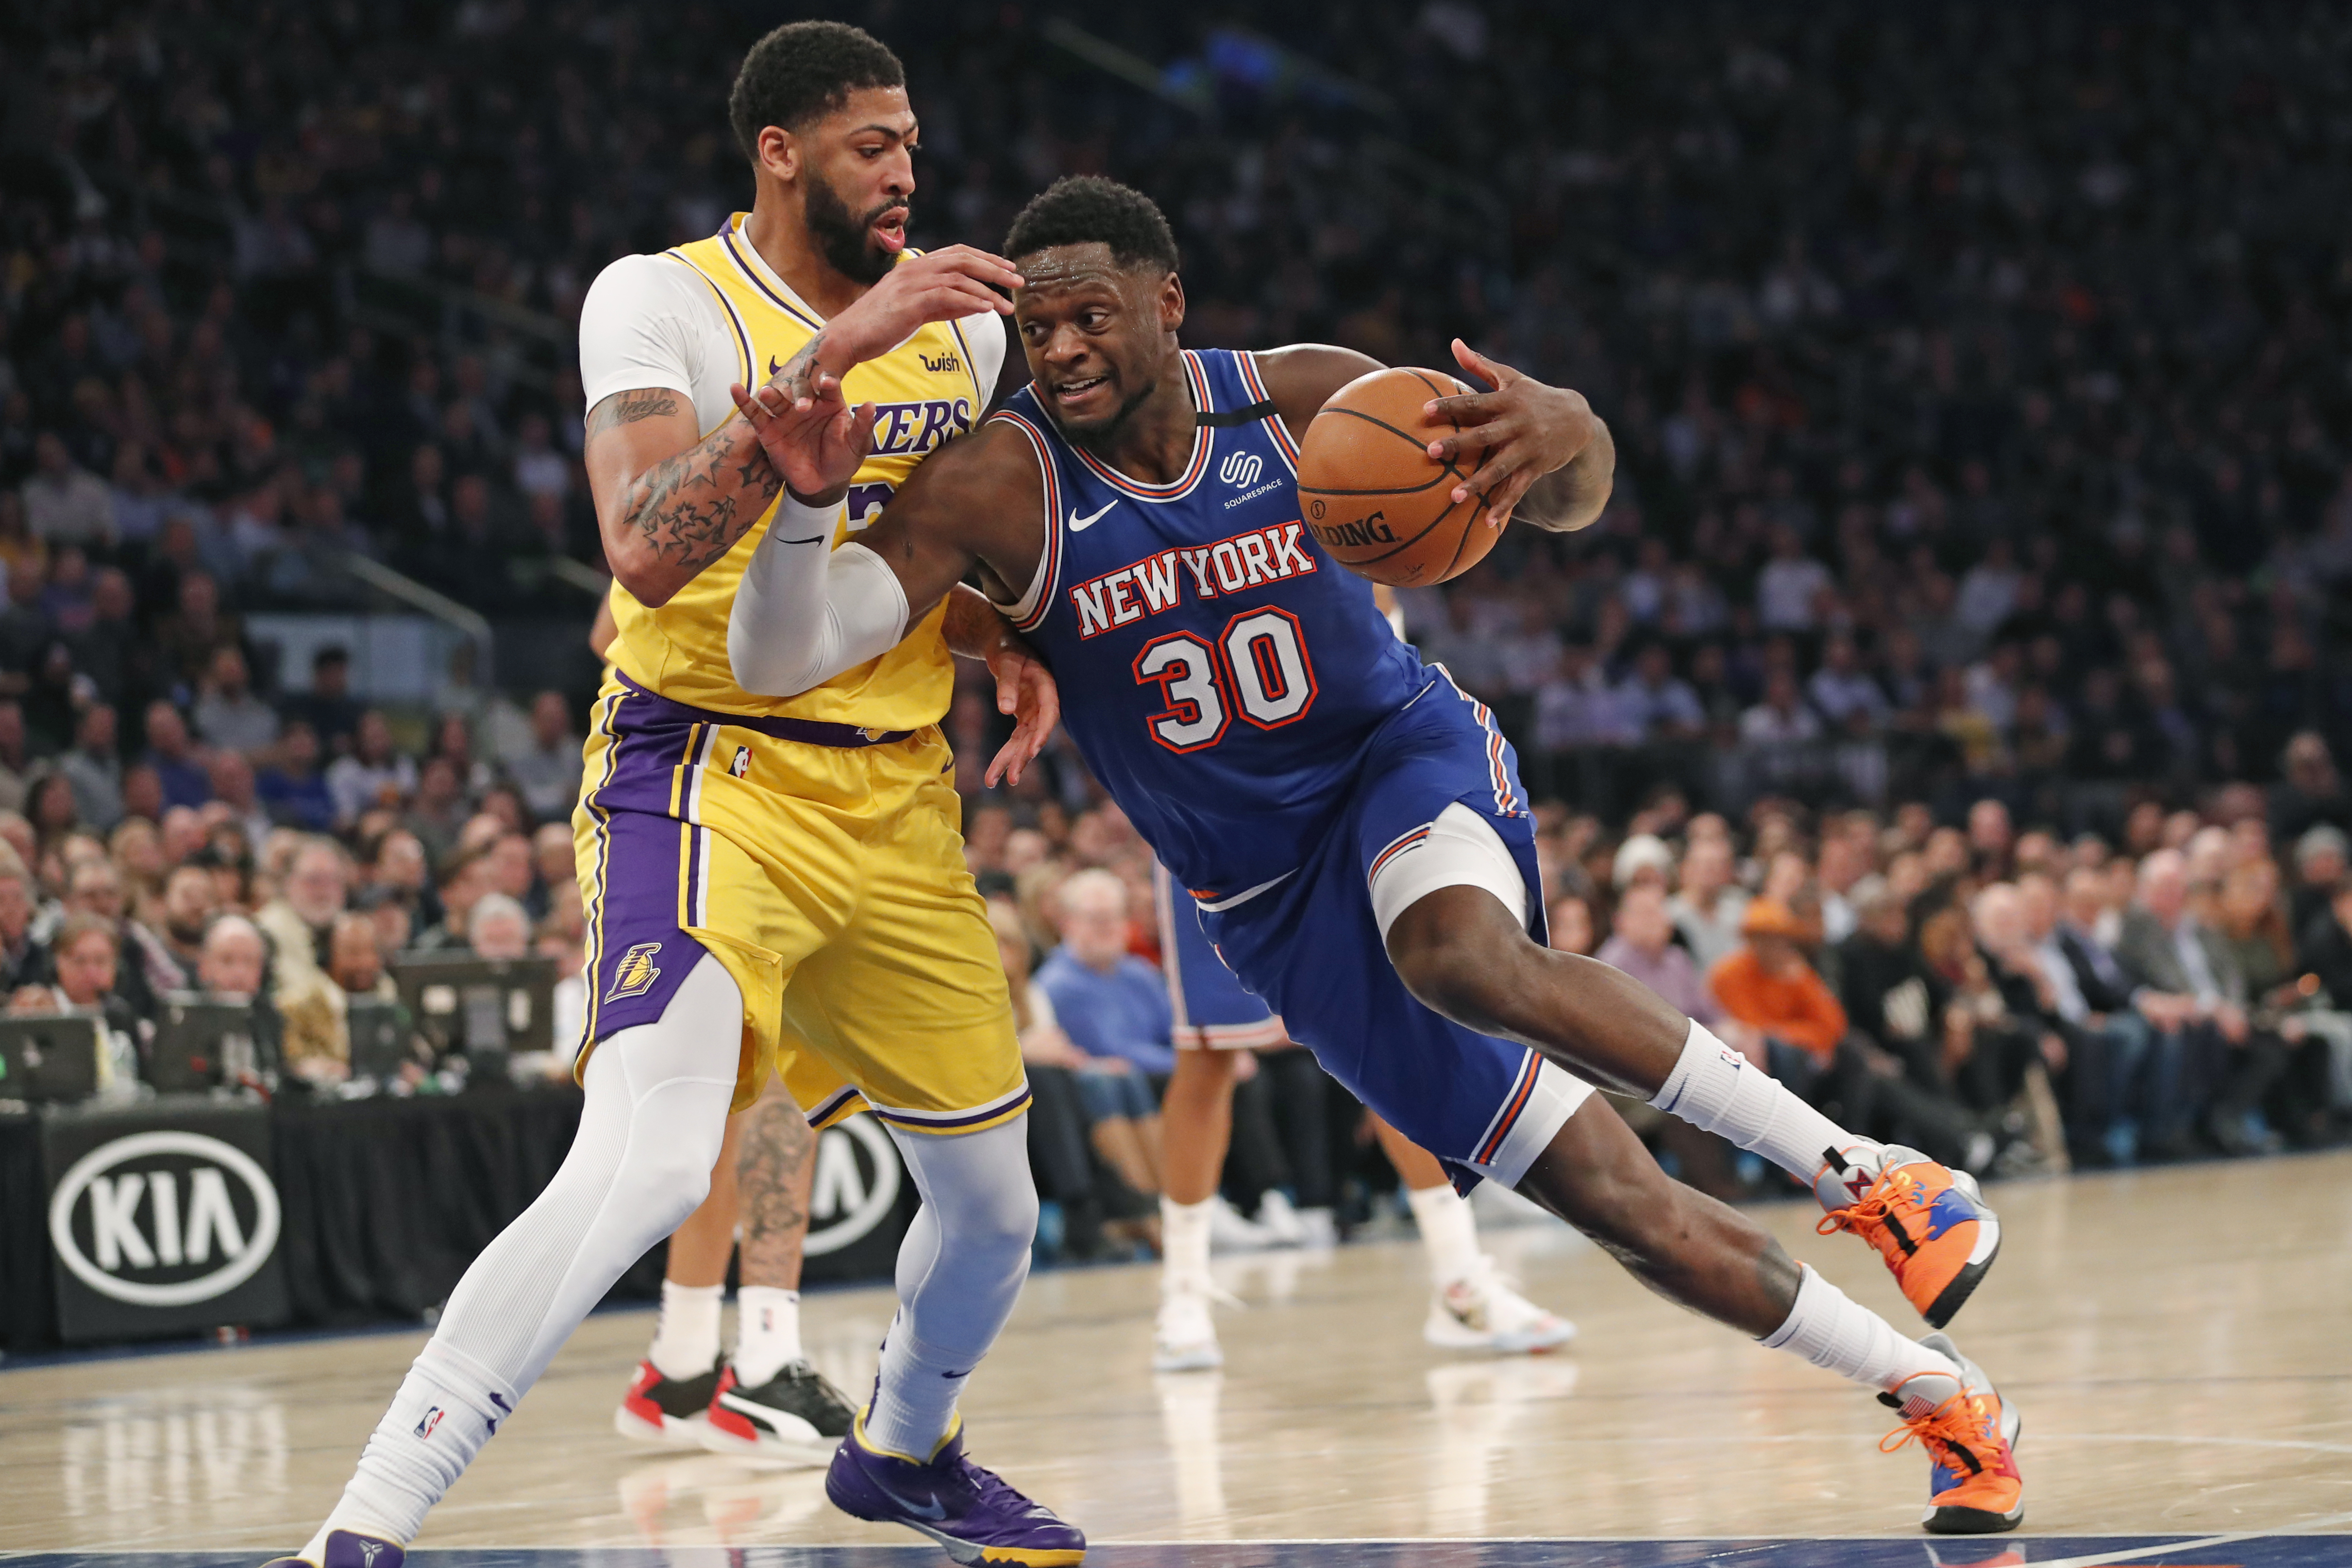 Los Angeles Lakers: 4 Players they should have taken over Julius Randle